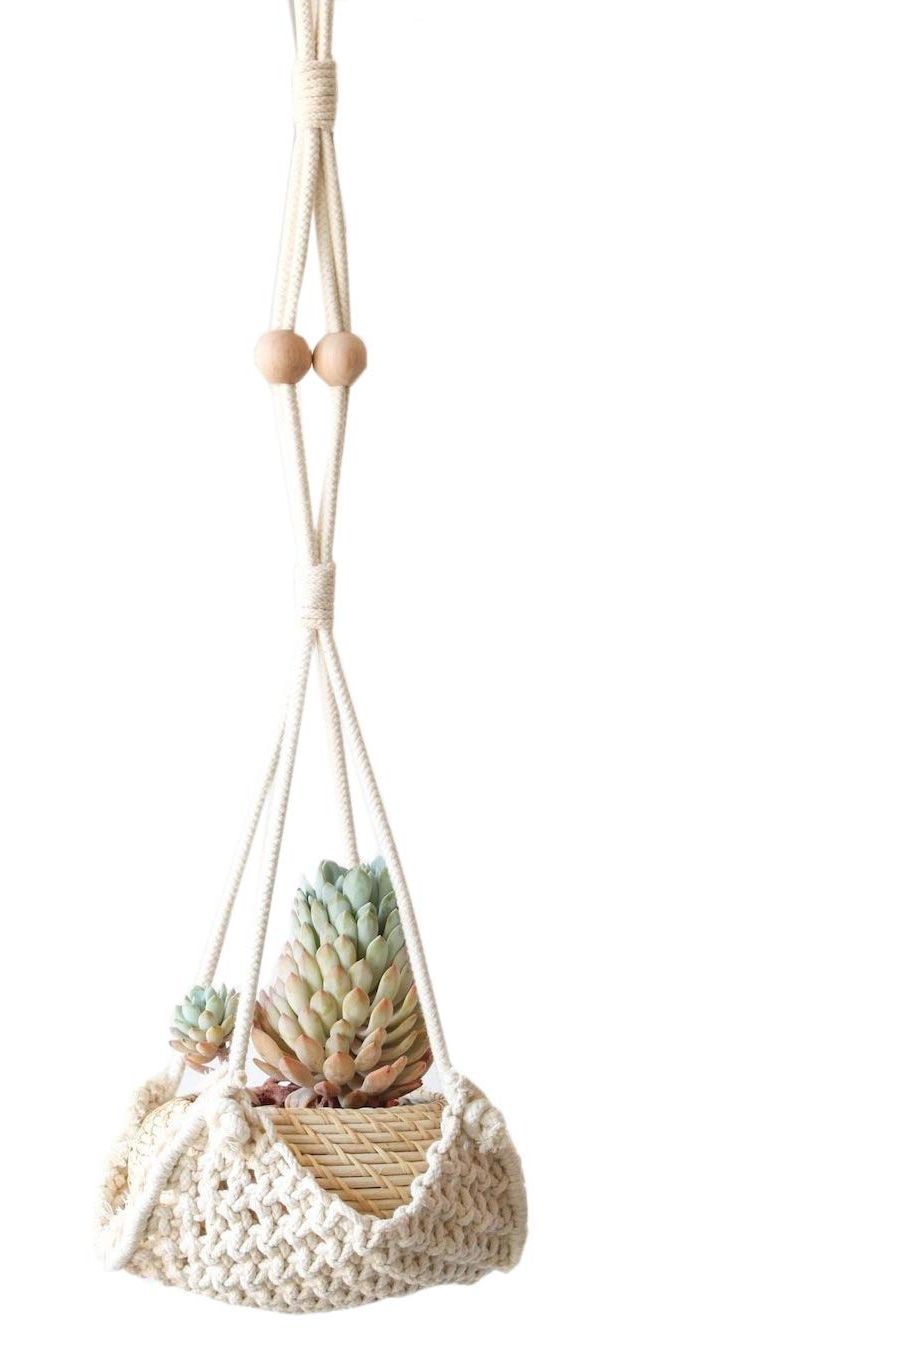 14 Creative Air Plant Display Ideas - Best Air Plants for Indoors